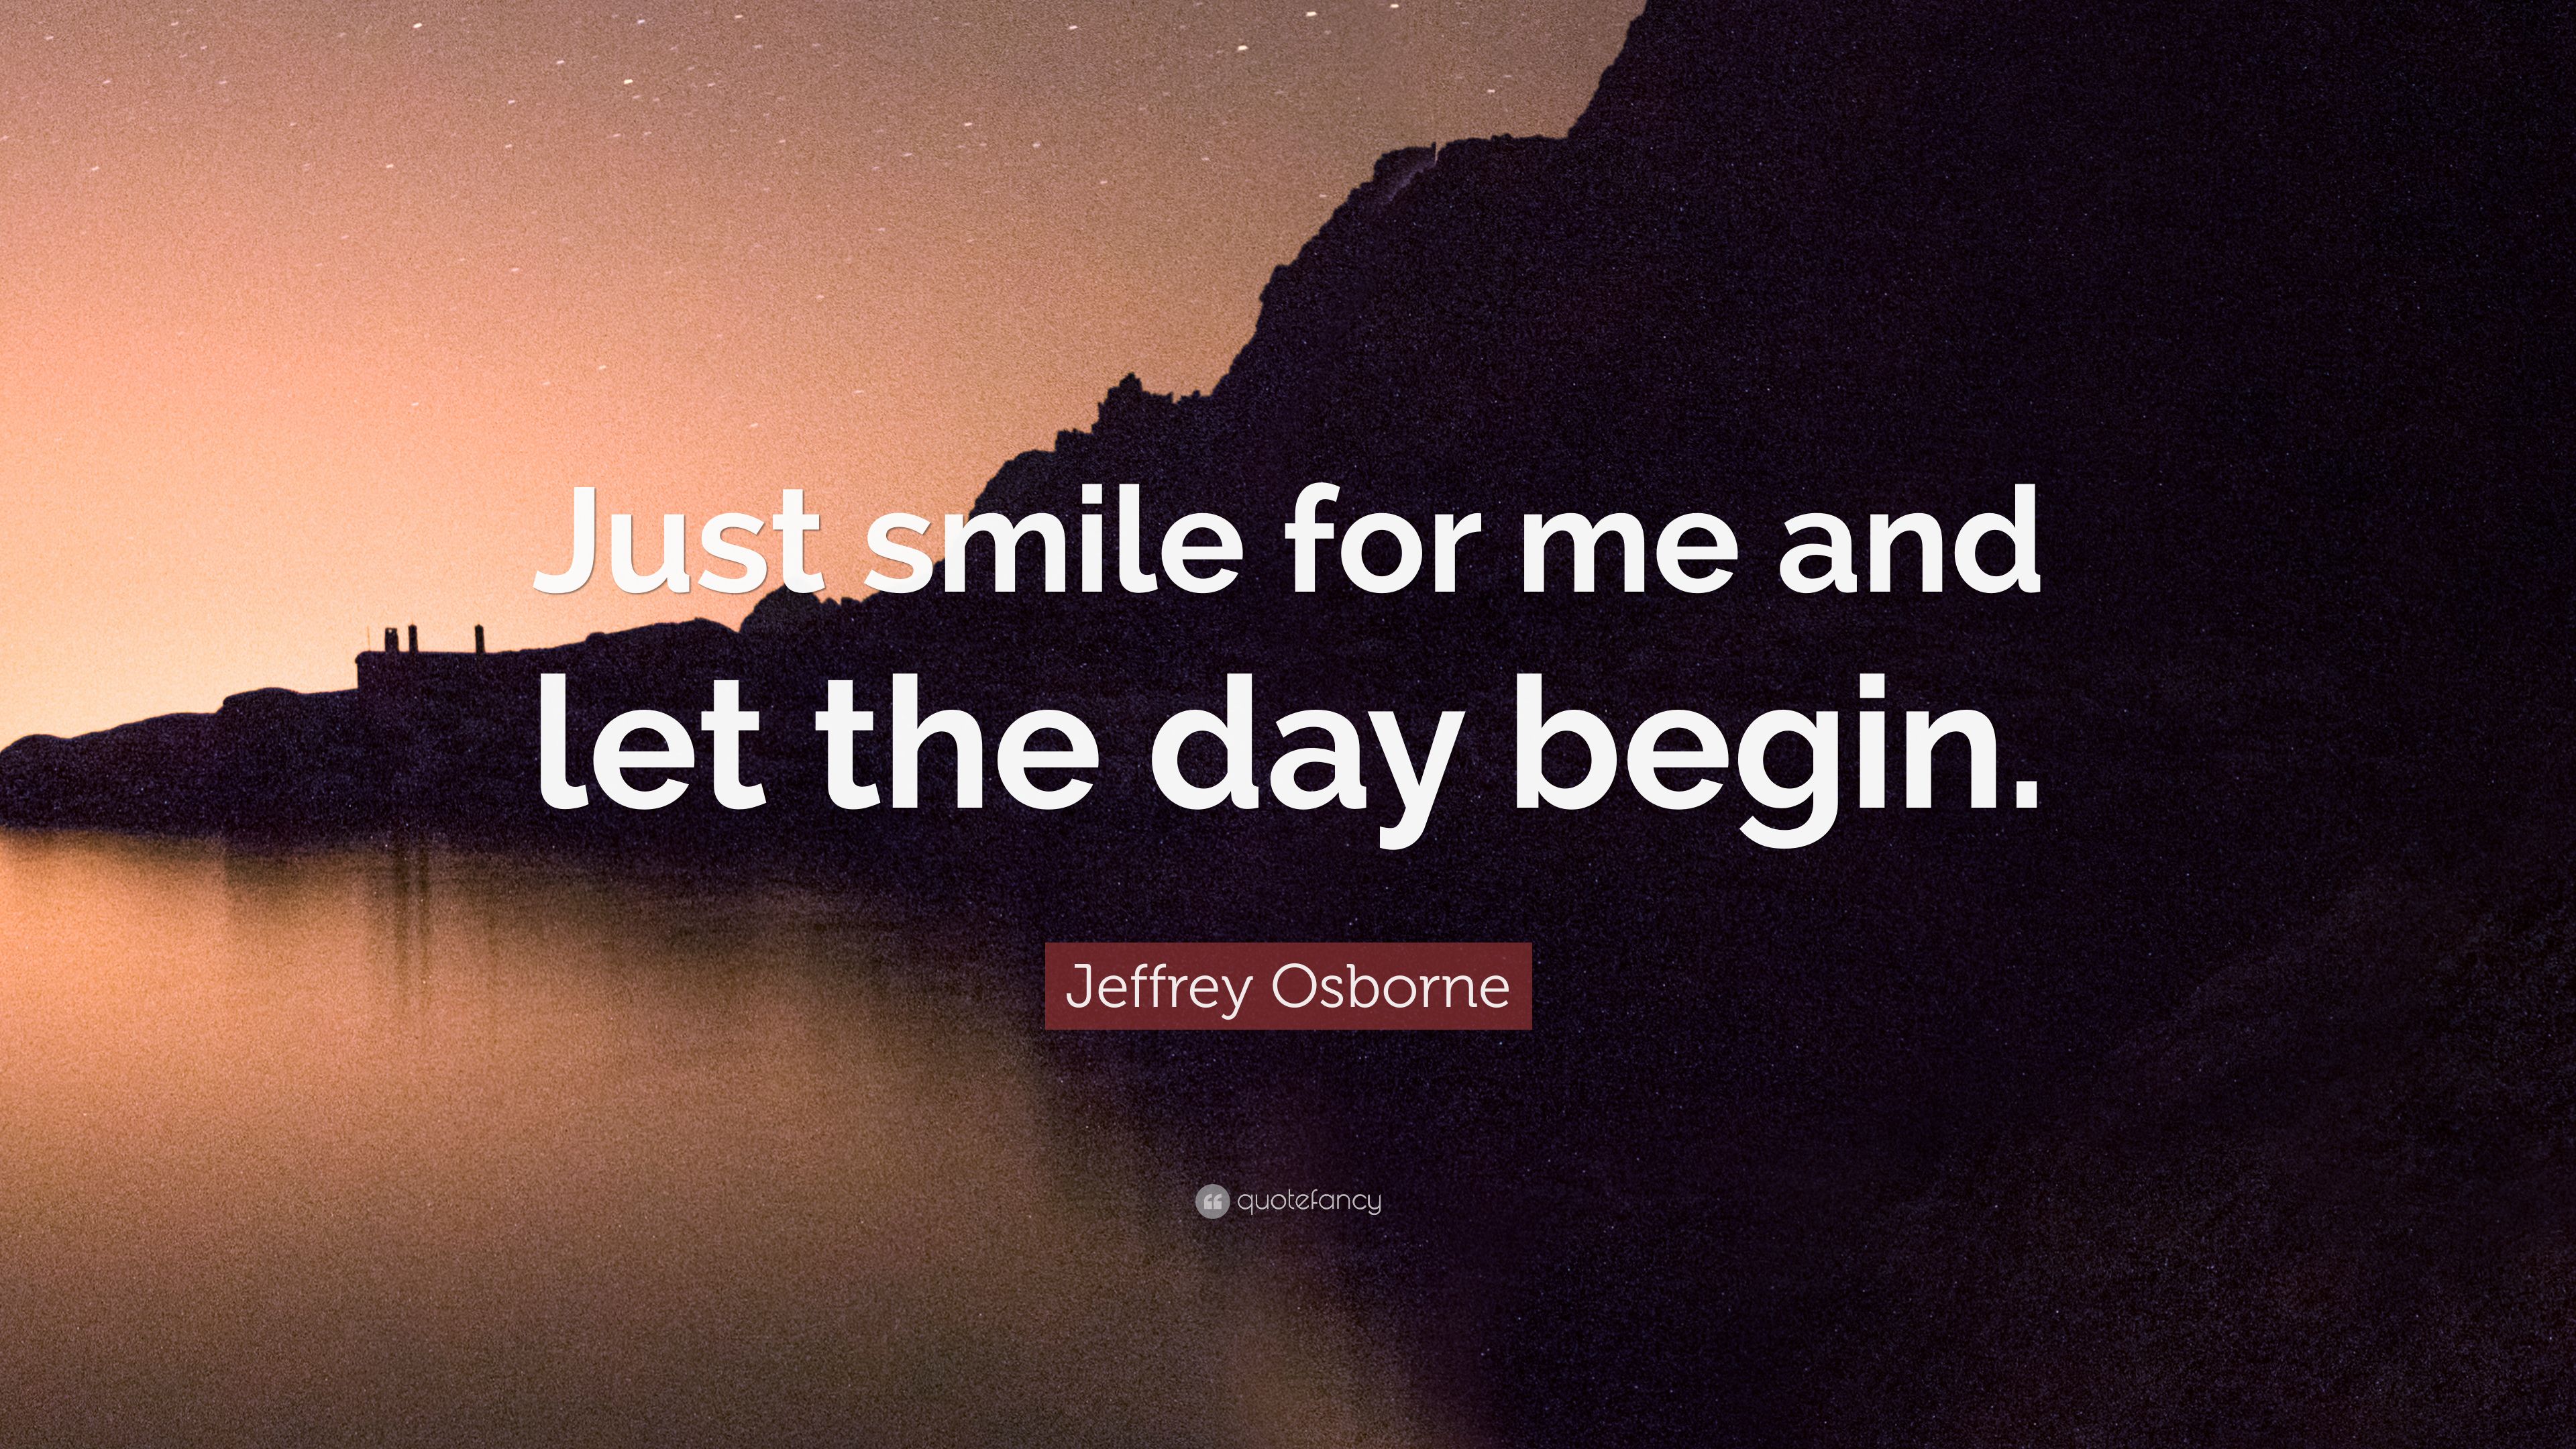 Jeffrey Osborne Quote: “Just smile for me and let the day begin.” 7